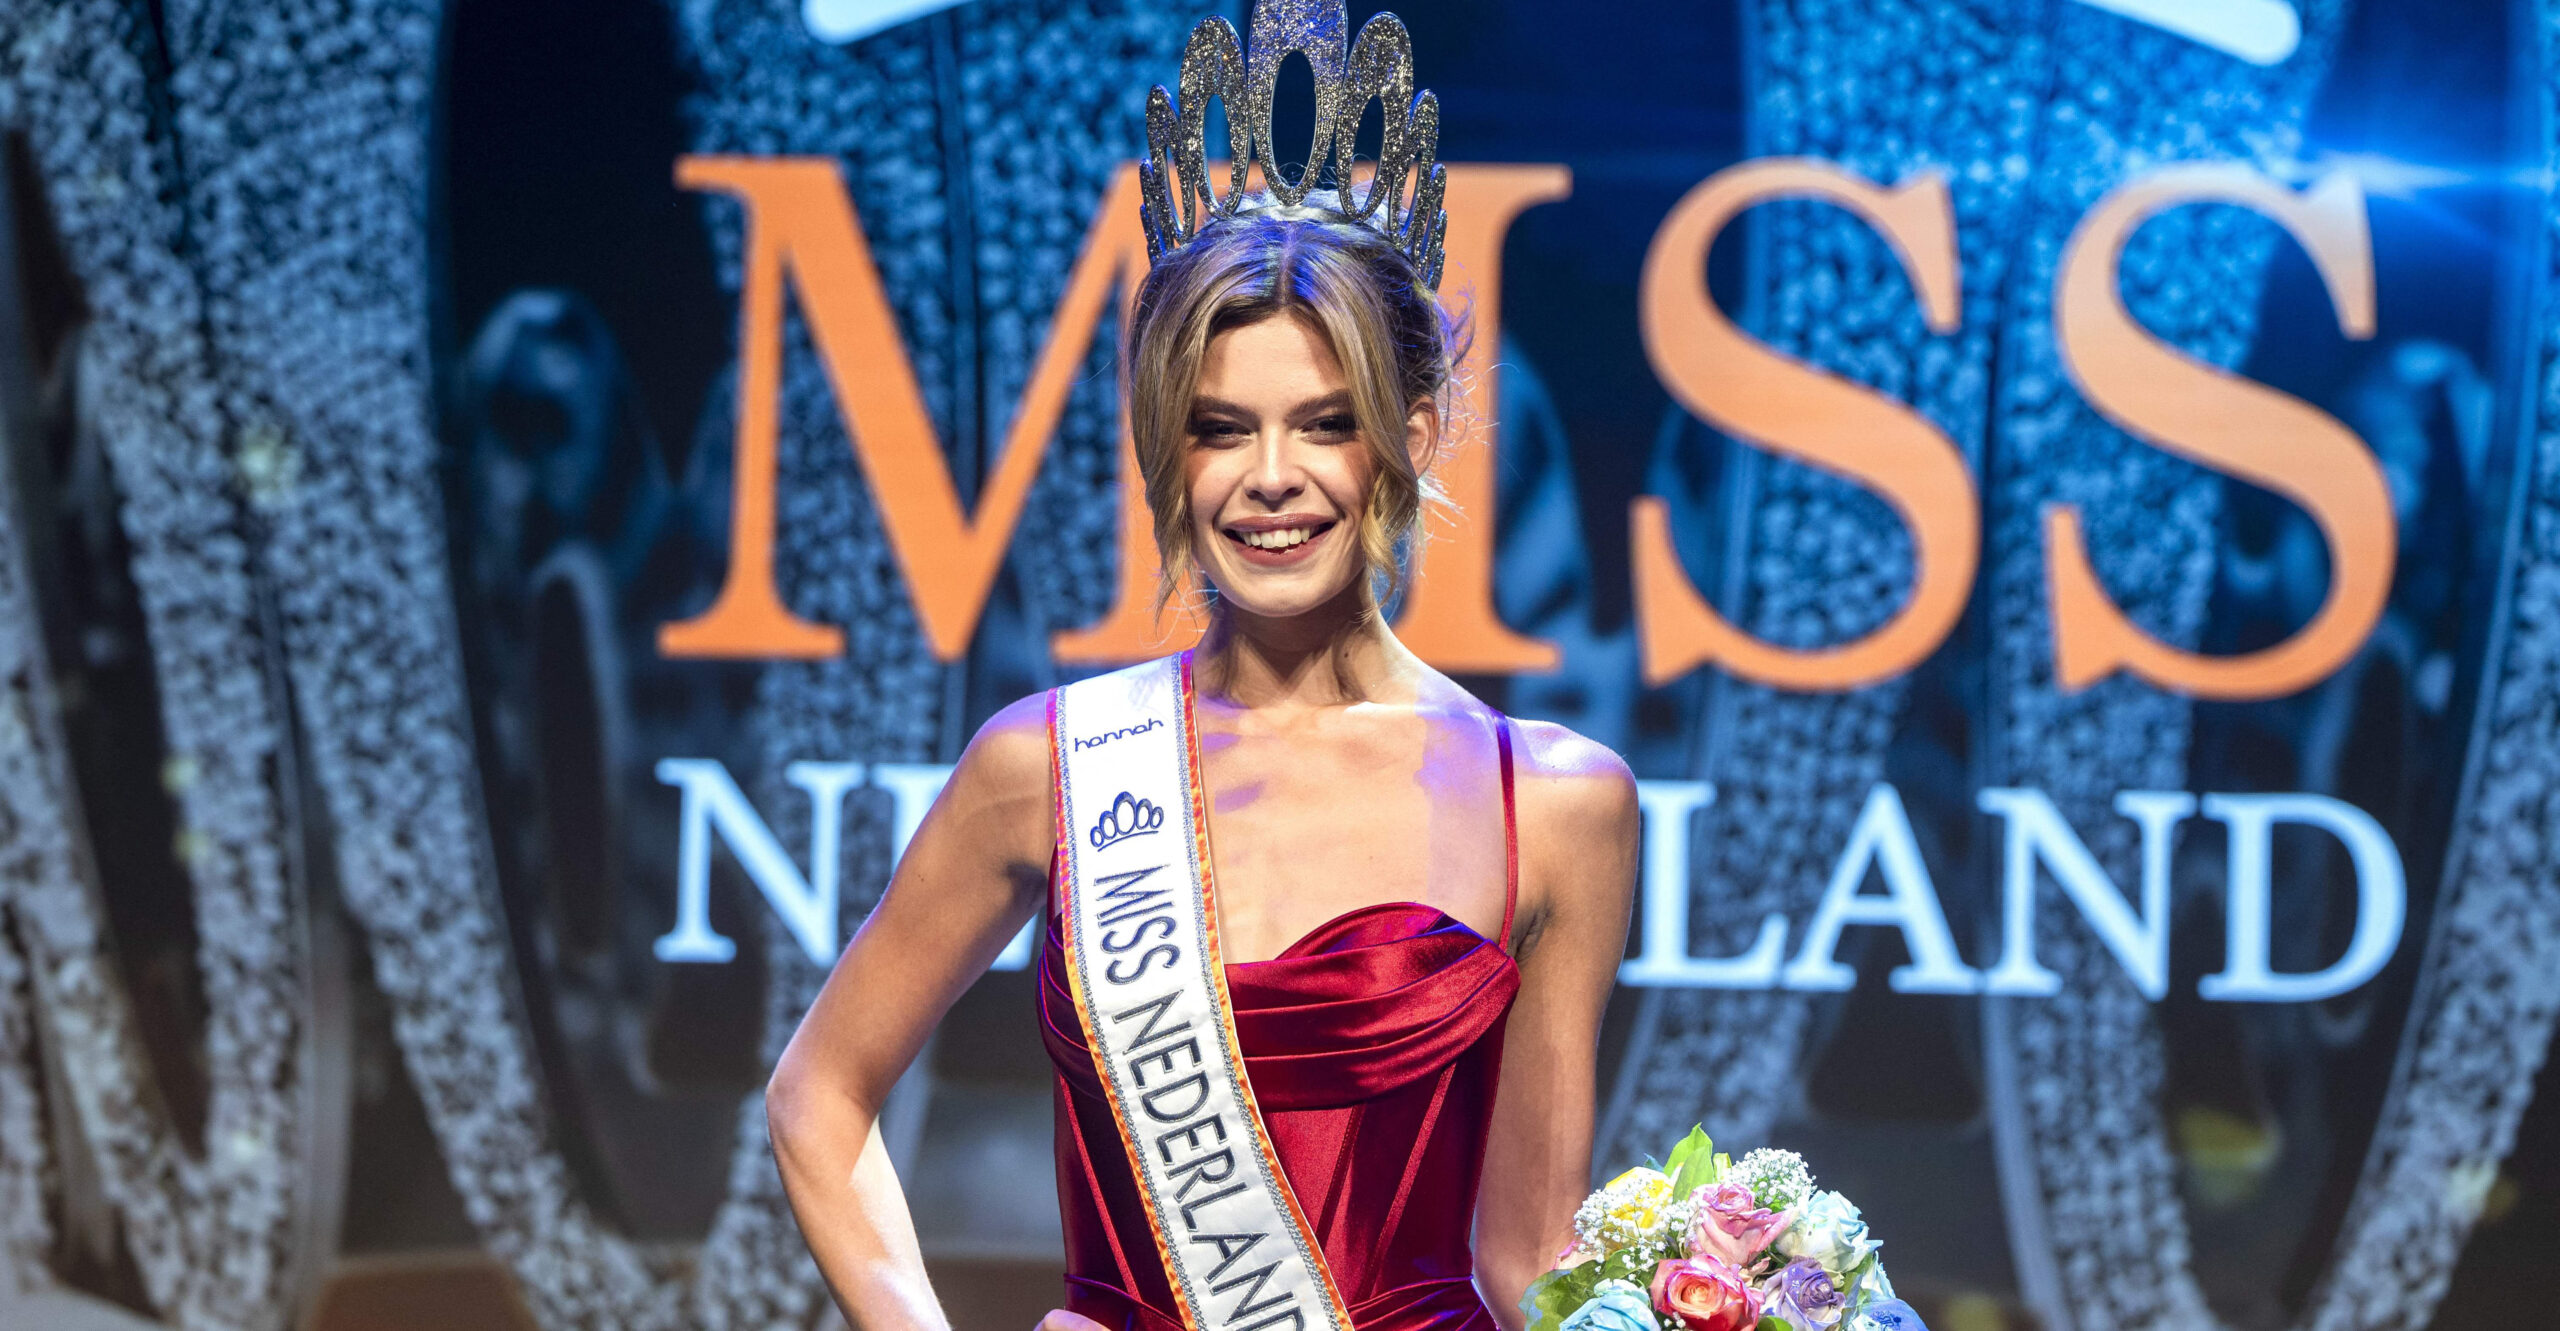 Transgender Model Wins Miss Universe Pageant in the Netherlands Long Island, NY